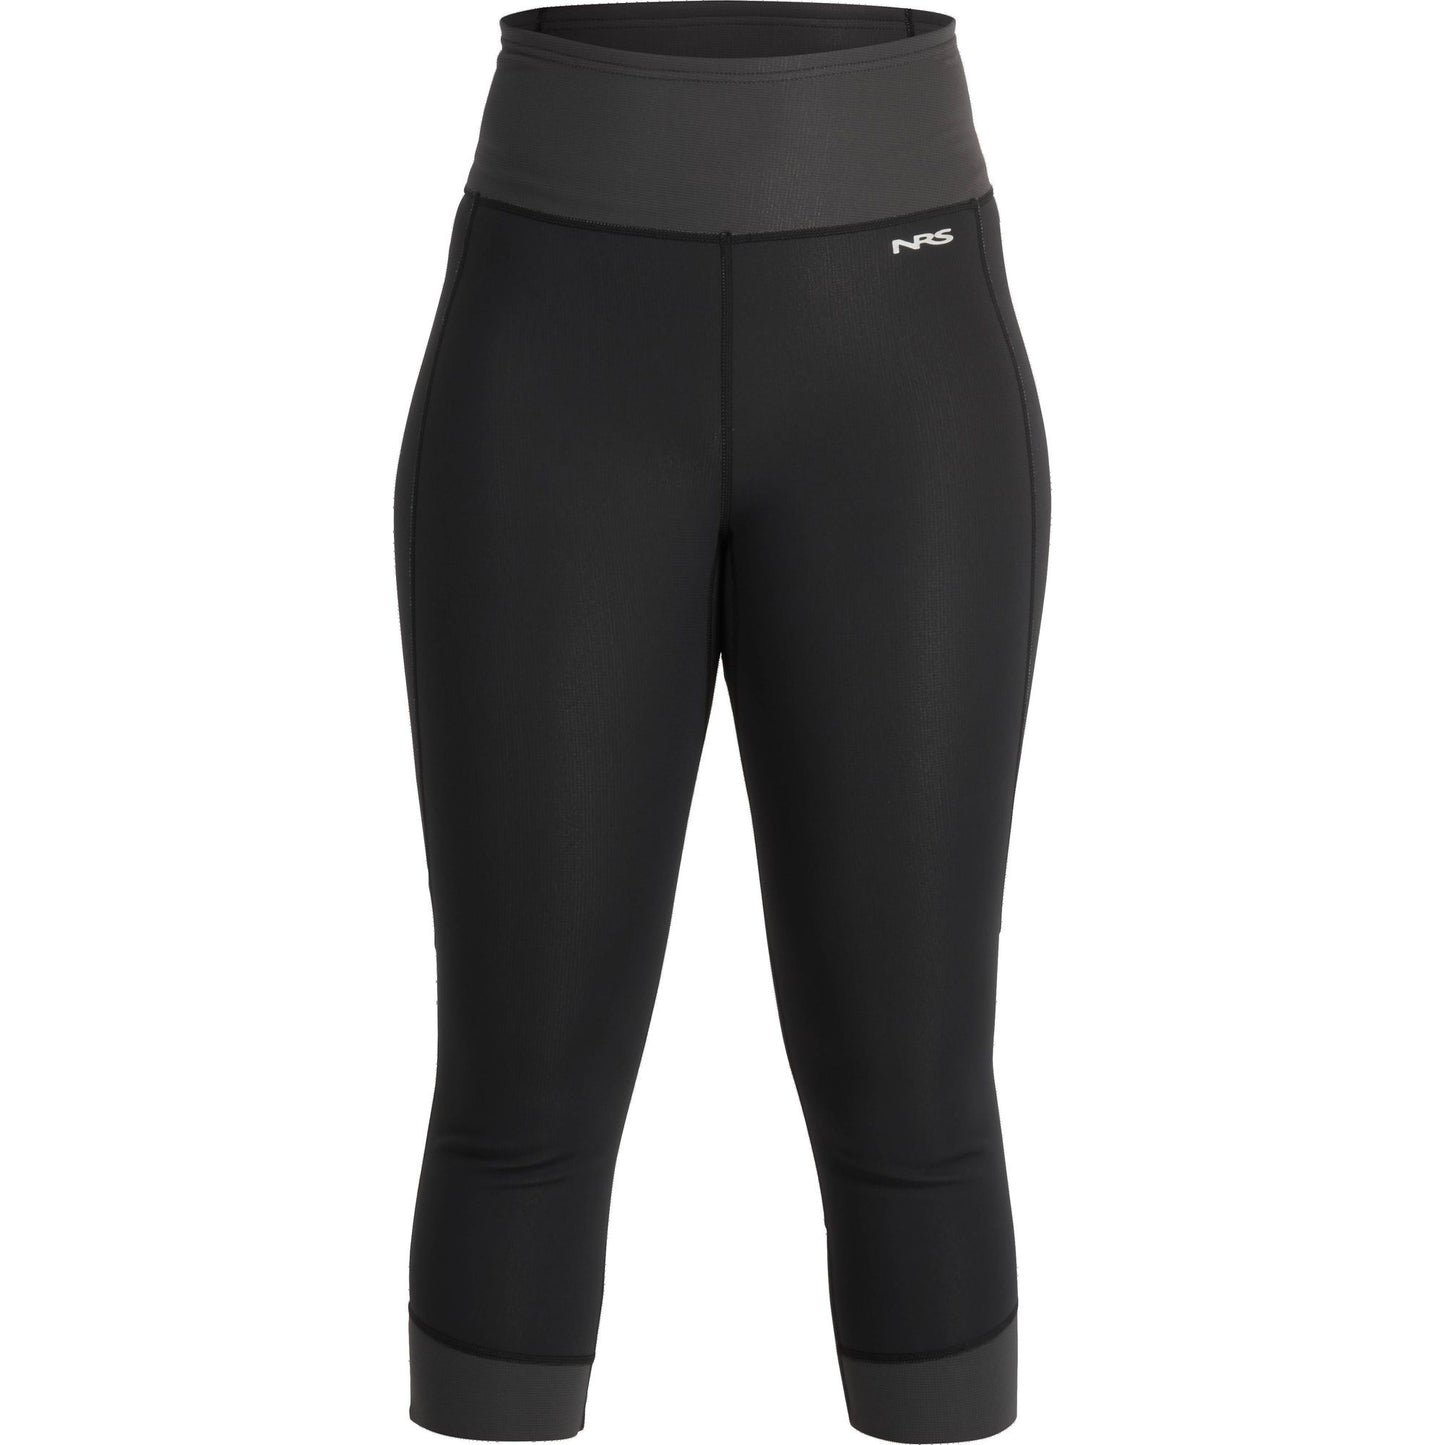 Black Hydroskin 0.5 Capri athletic leggings with a wide waistband and a small white logo on the front left by NRS.